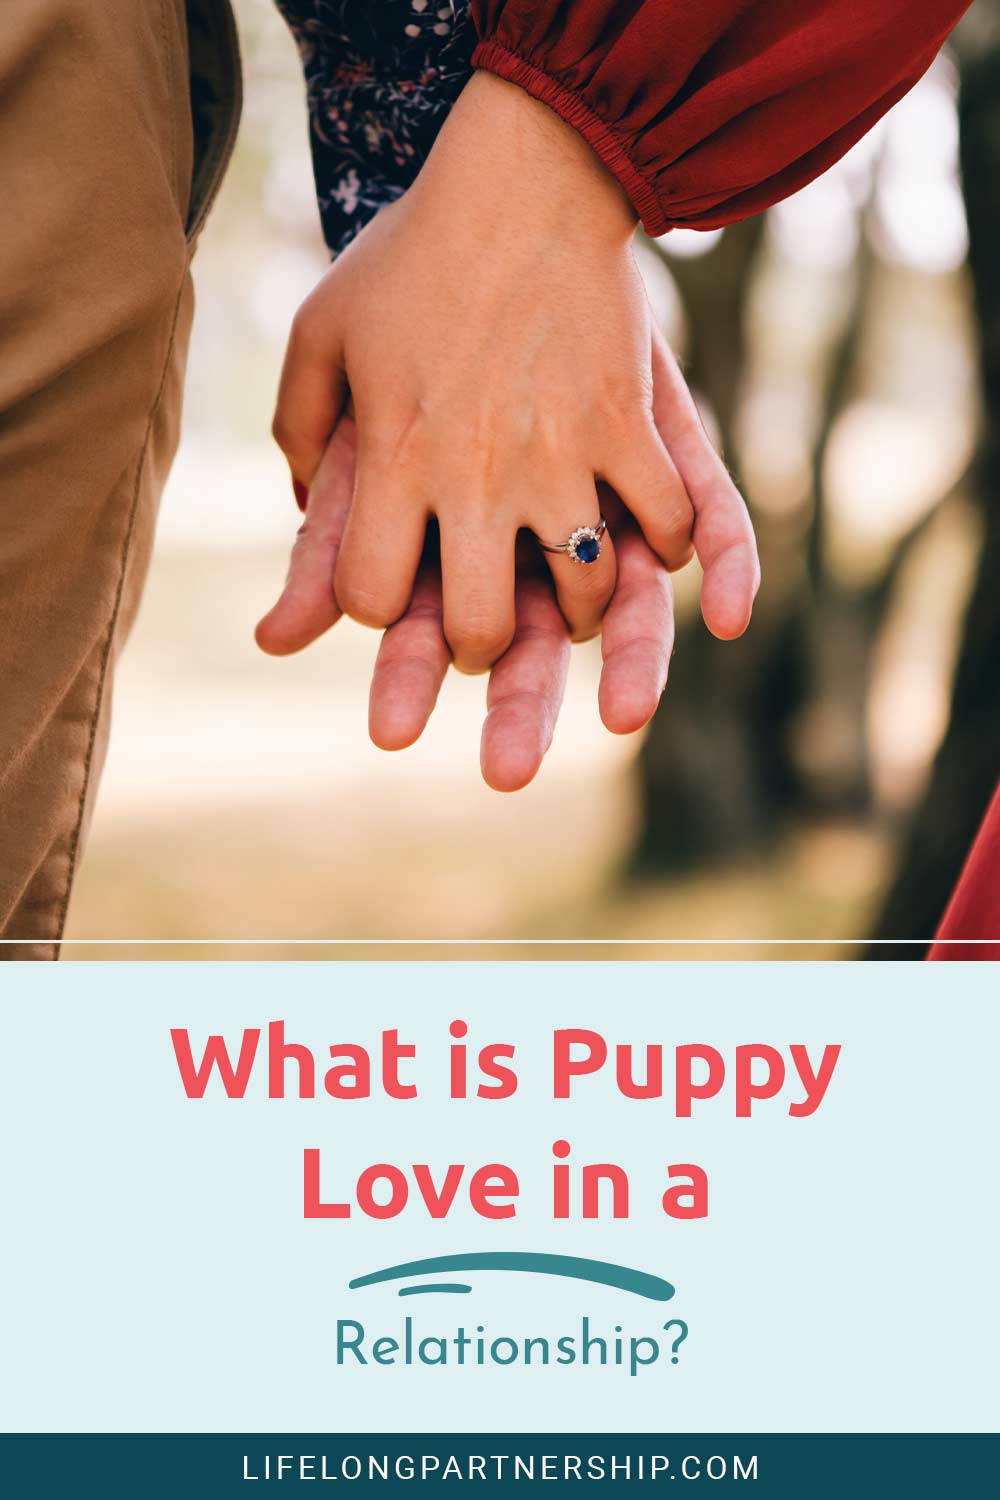 Couple holding their hands - What is Puppy Love in a Relationship?